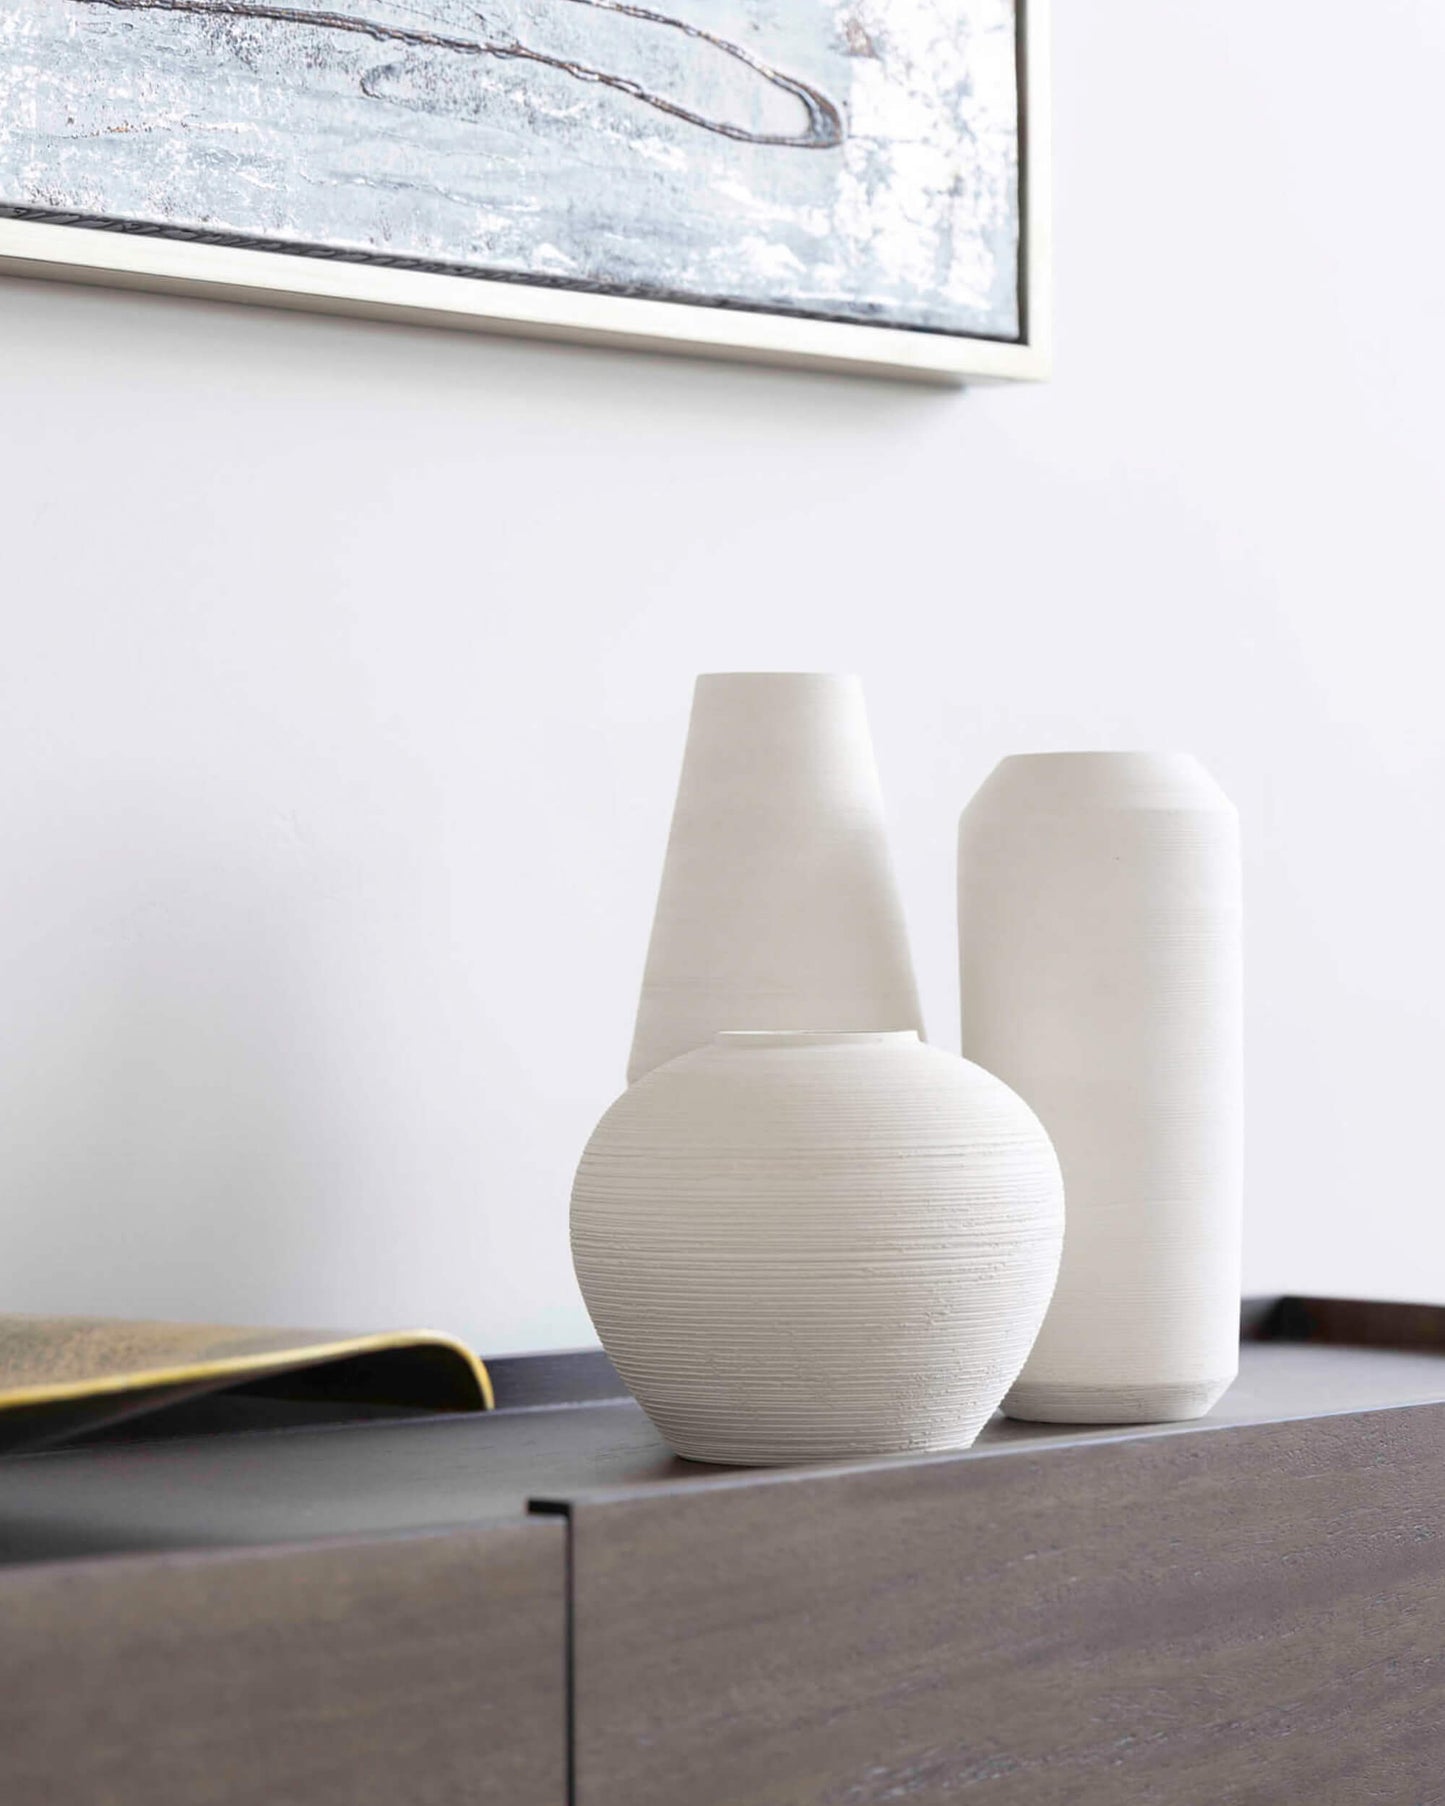 
                  
                    Fairkind's Zarina Vases on a black side table against a white textured wall. Handmade by master ceramists in Morocco.
                  
                